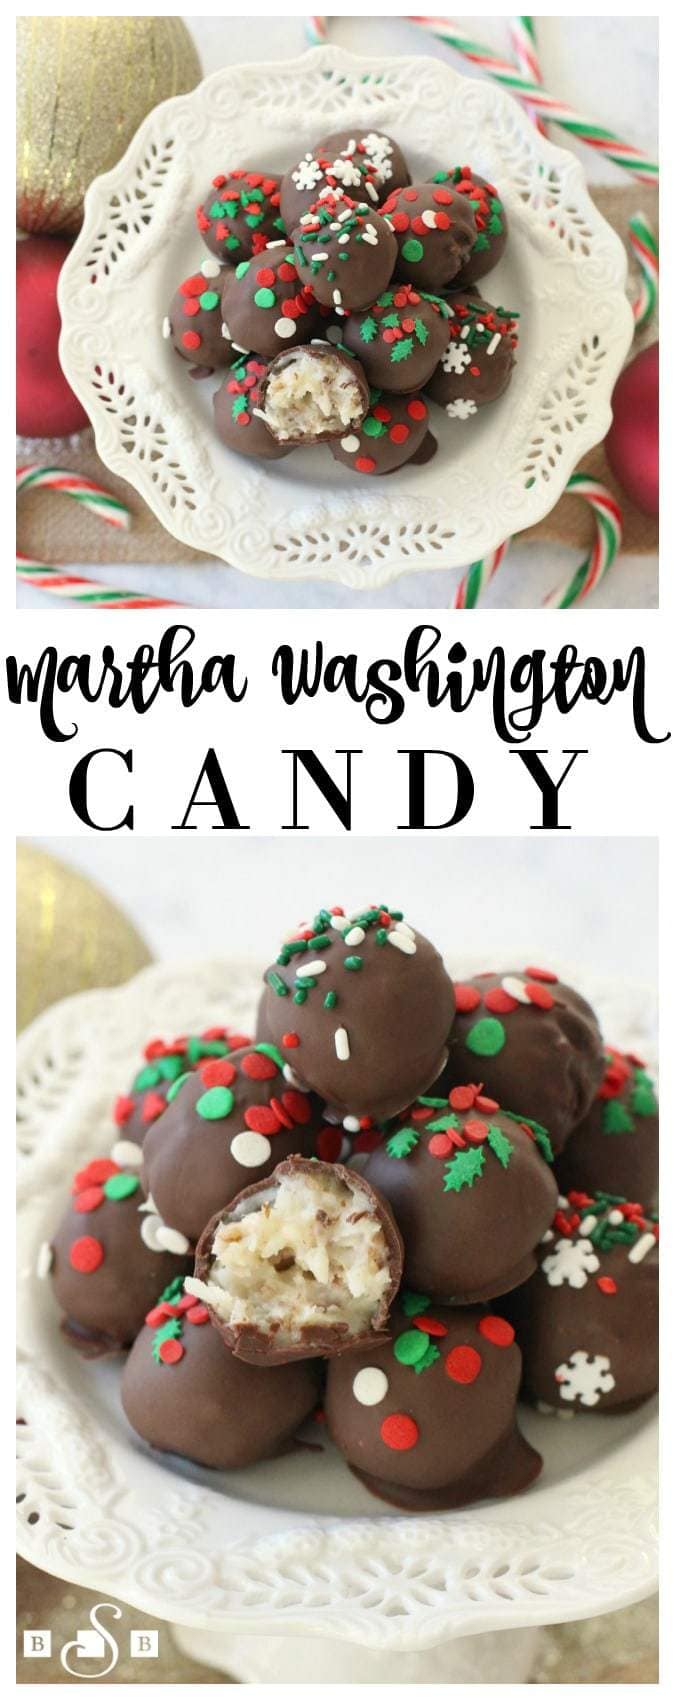 Martha Washington Candy - Butter With A Side of Bread